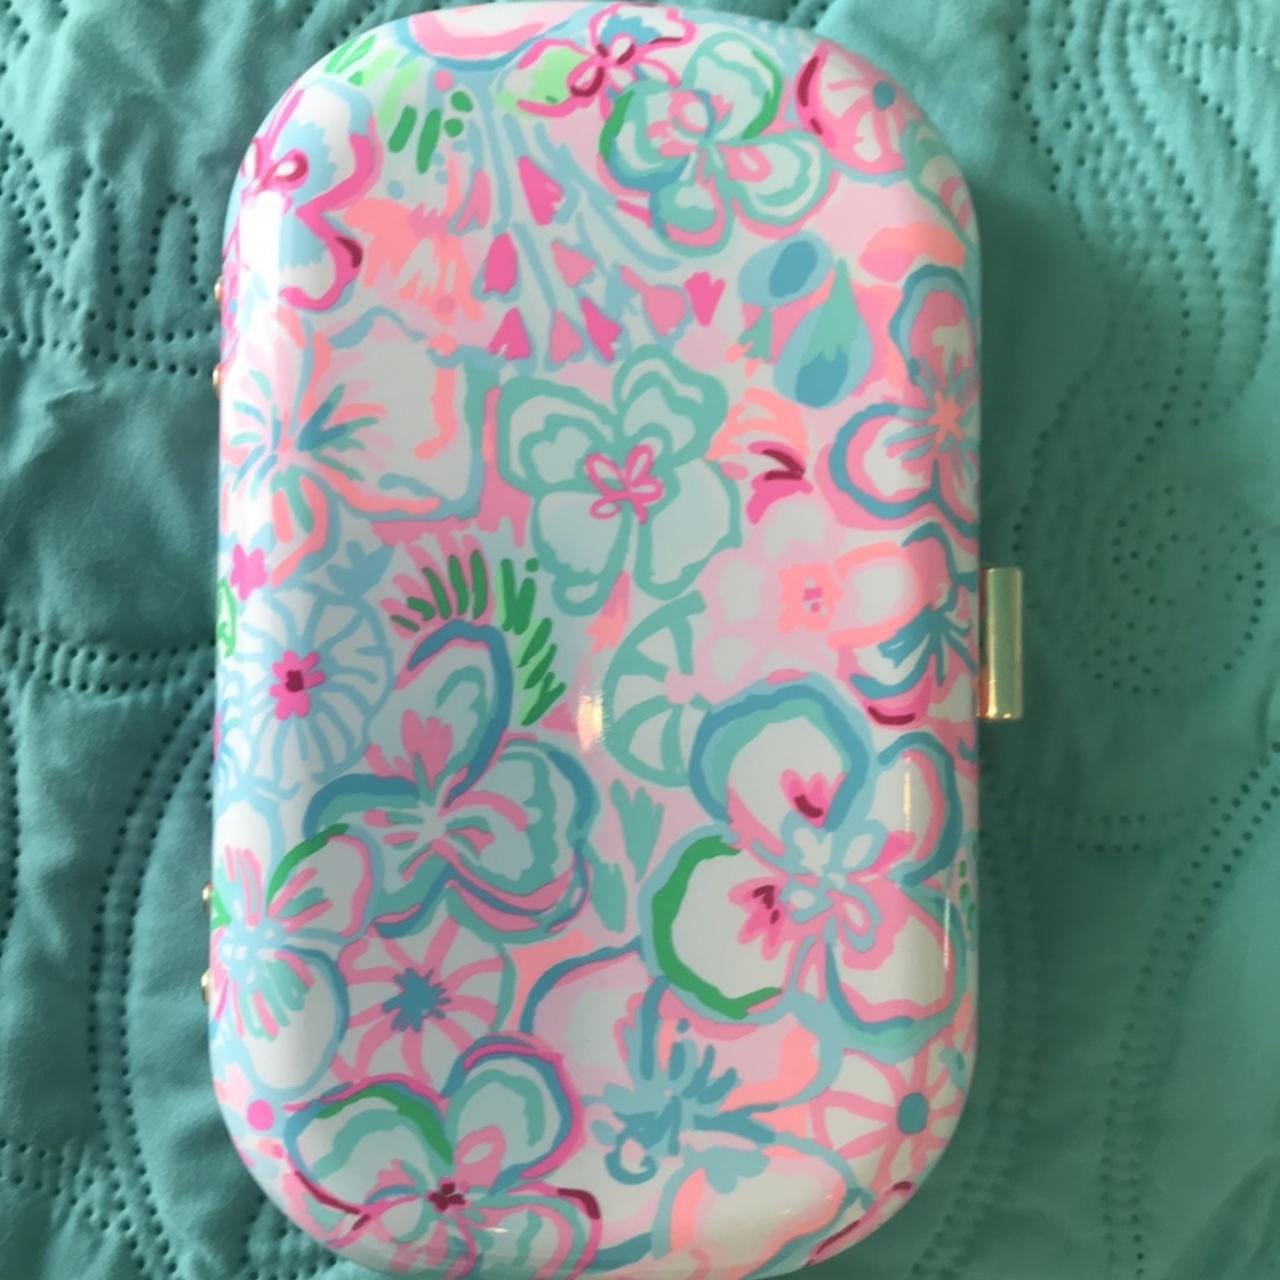 Lilly Pulitzer Women's Bag